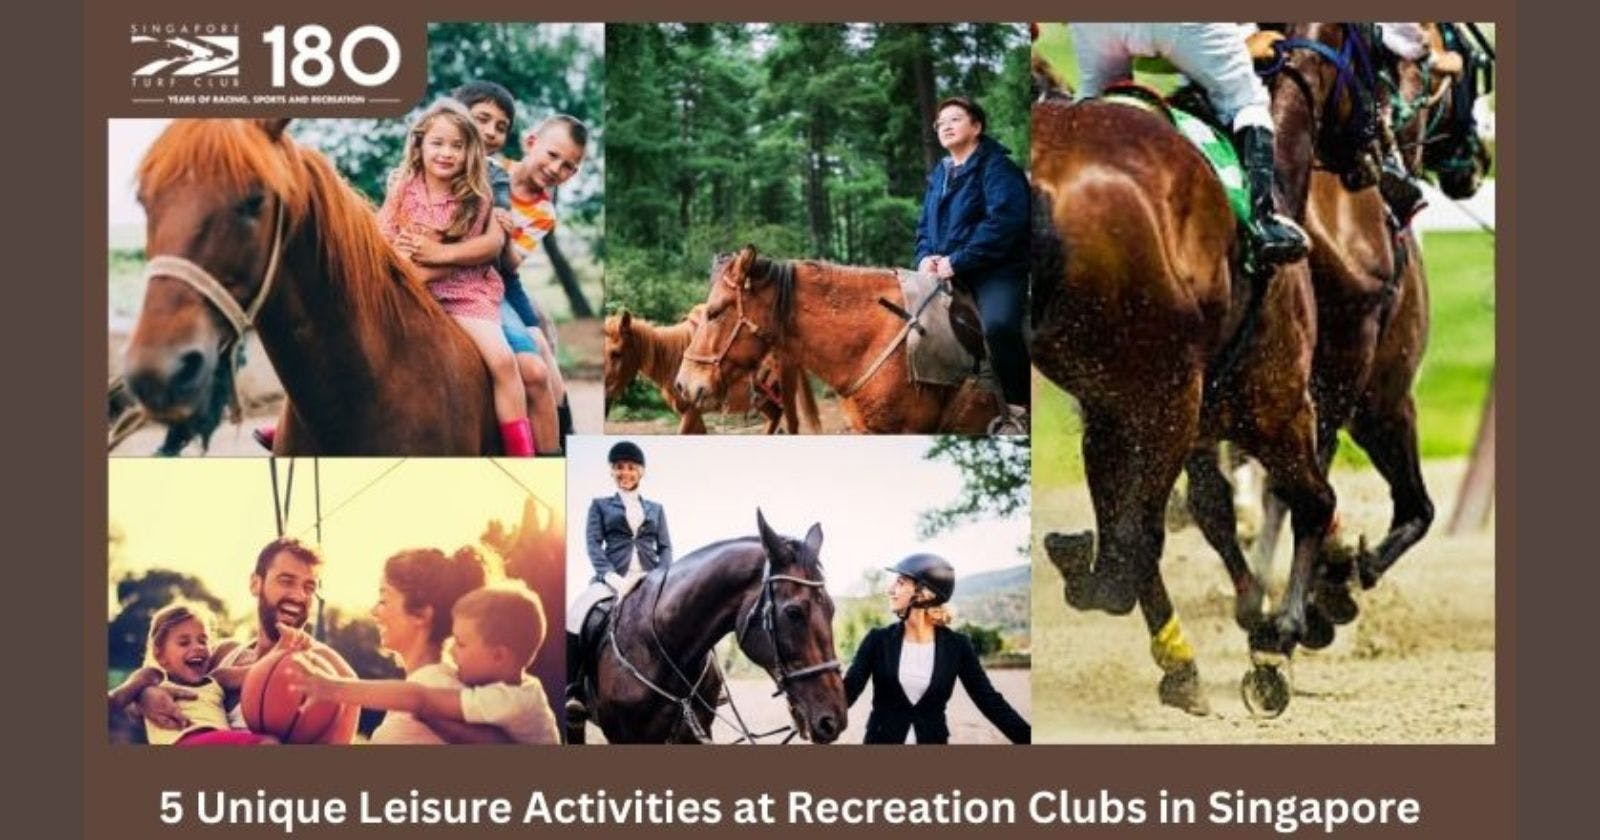 5 Unique Leisure Activities at Recreation Clubs in Singapore